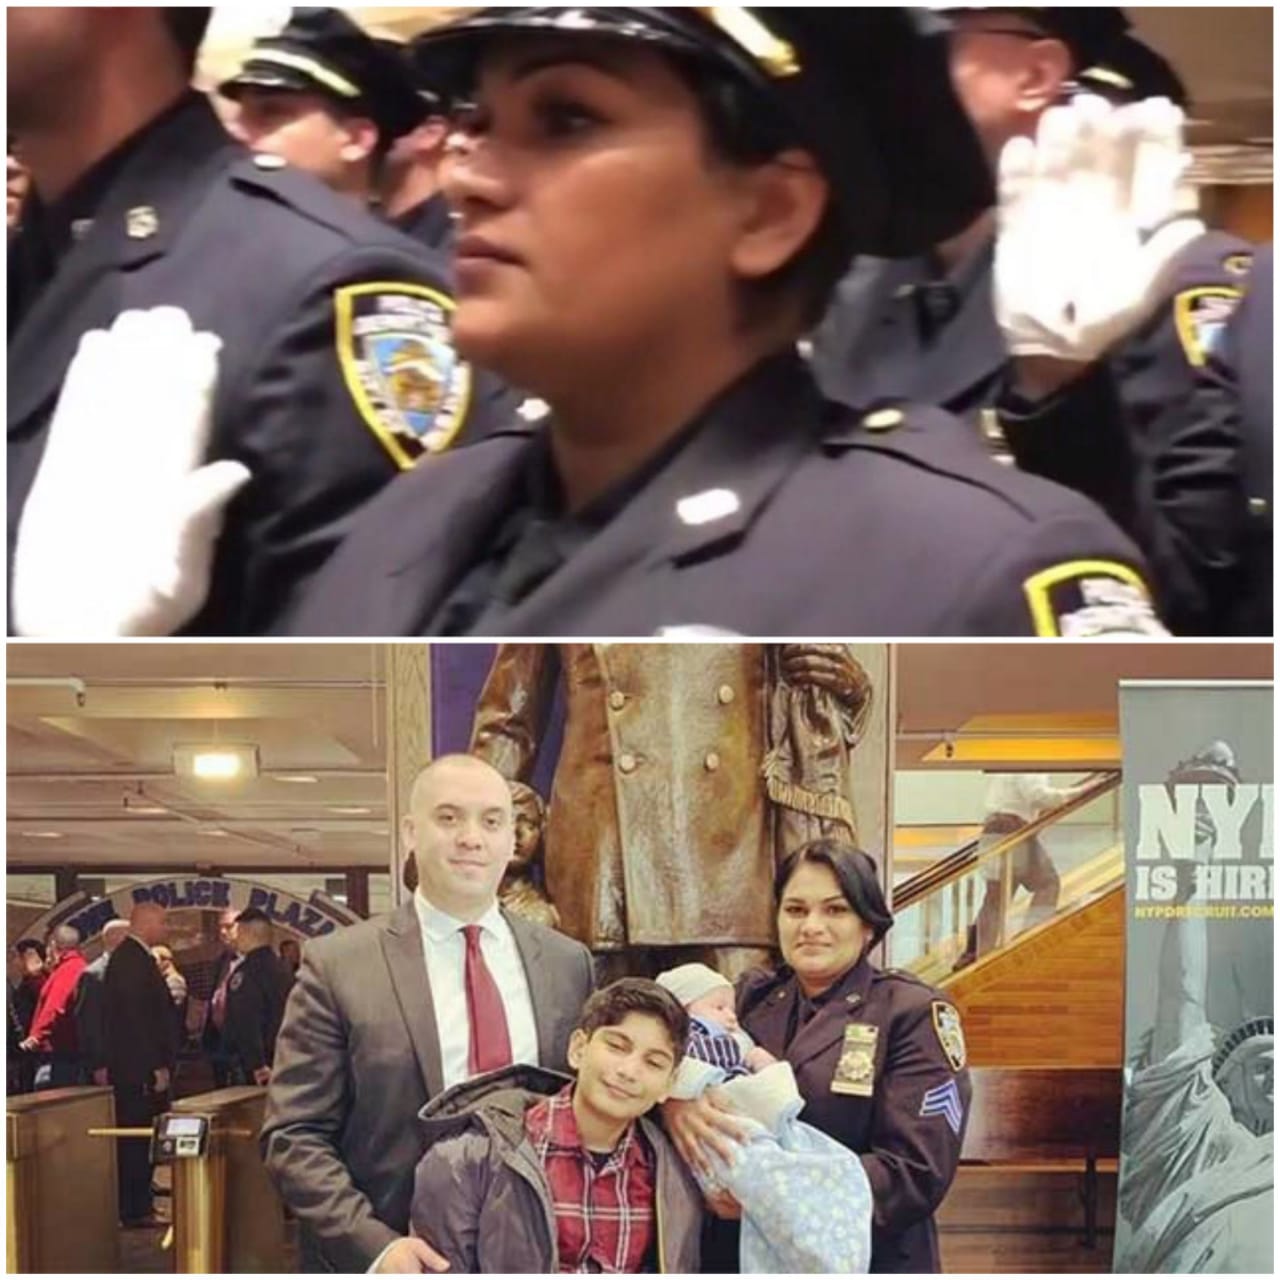 Captain Pratima named highest-ranking South Asian cop in NY